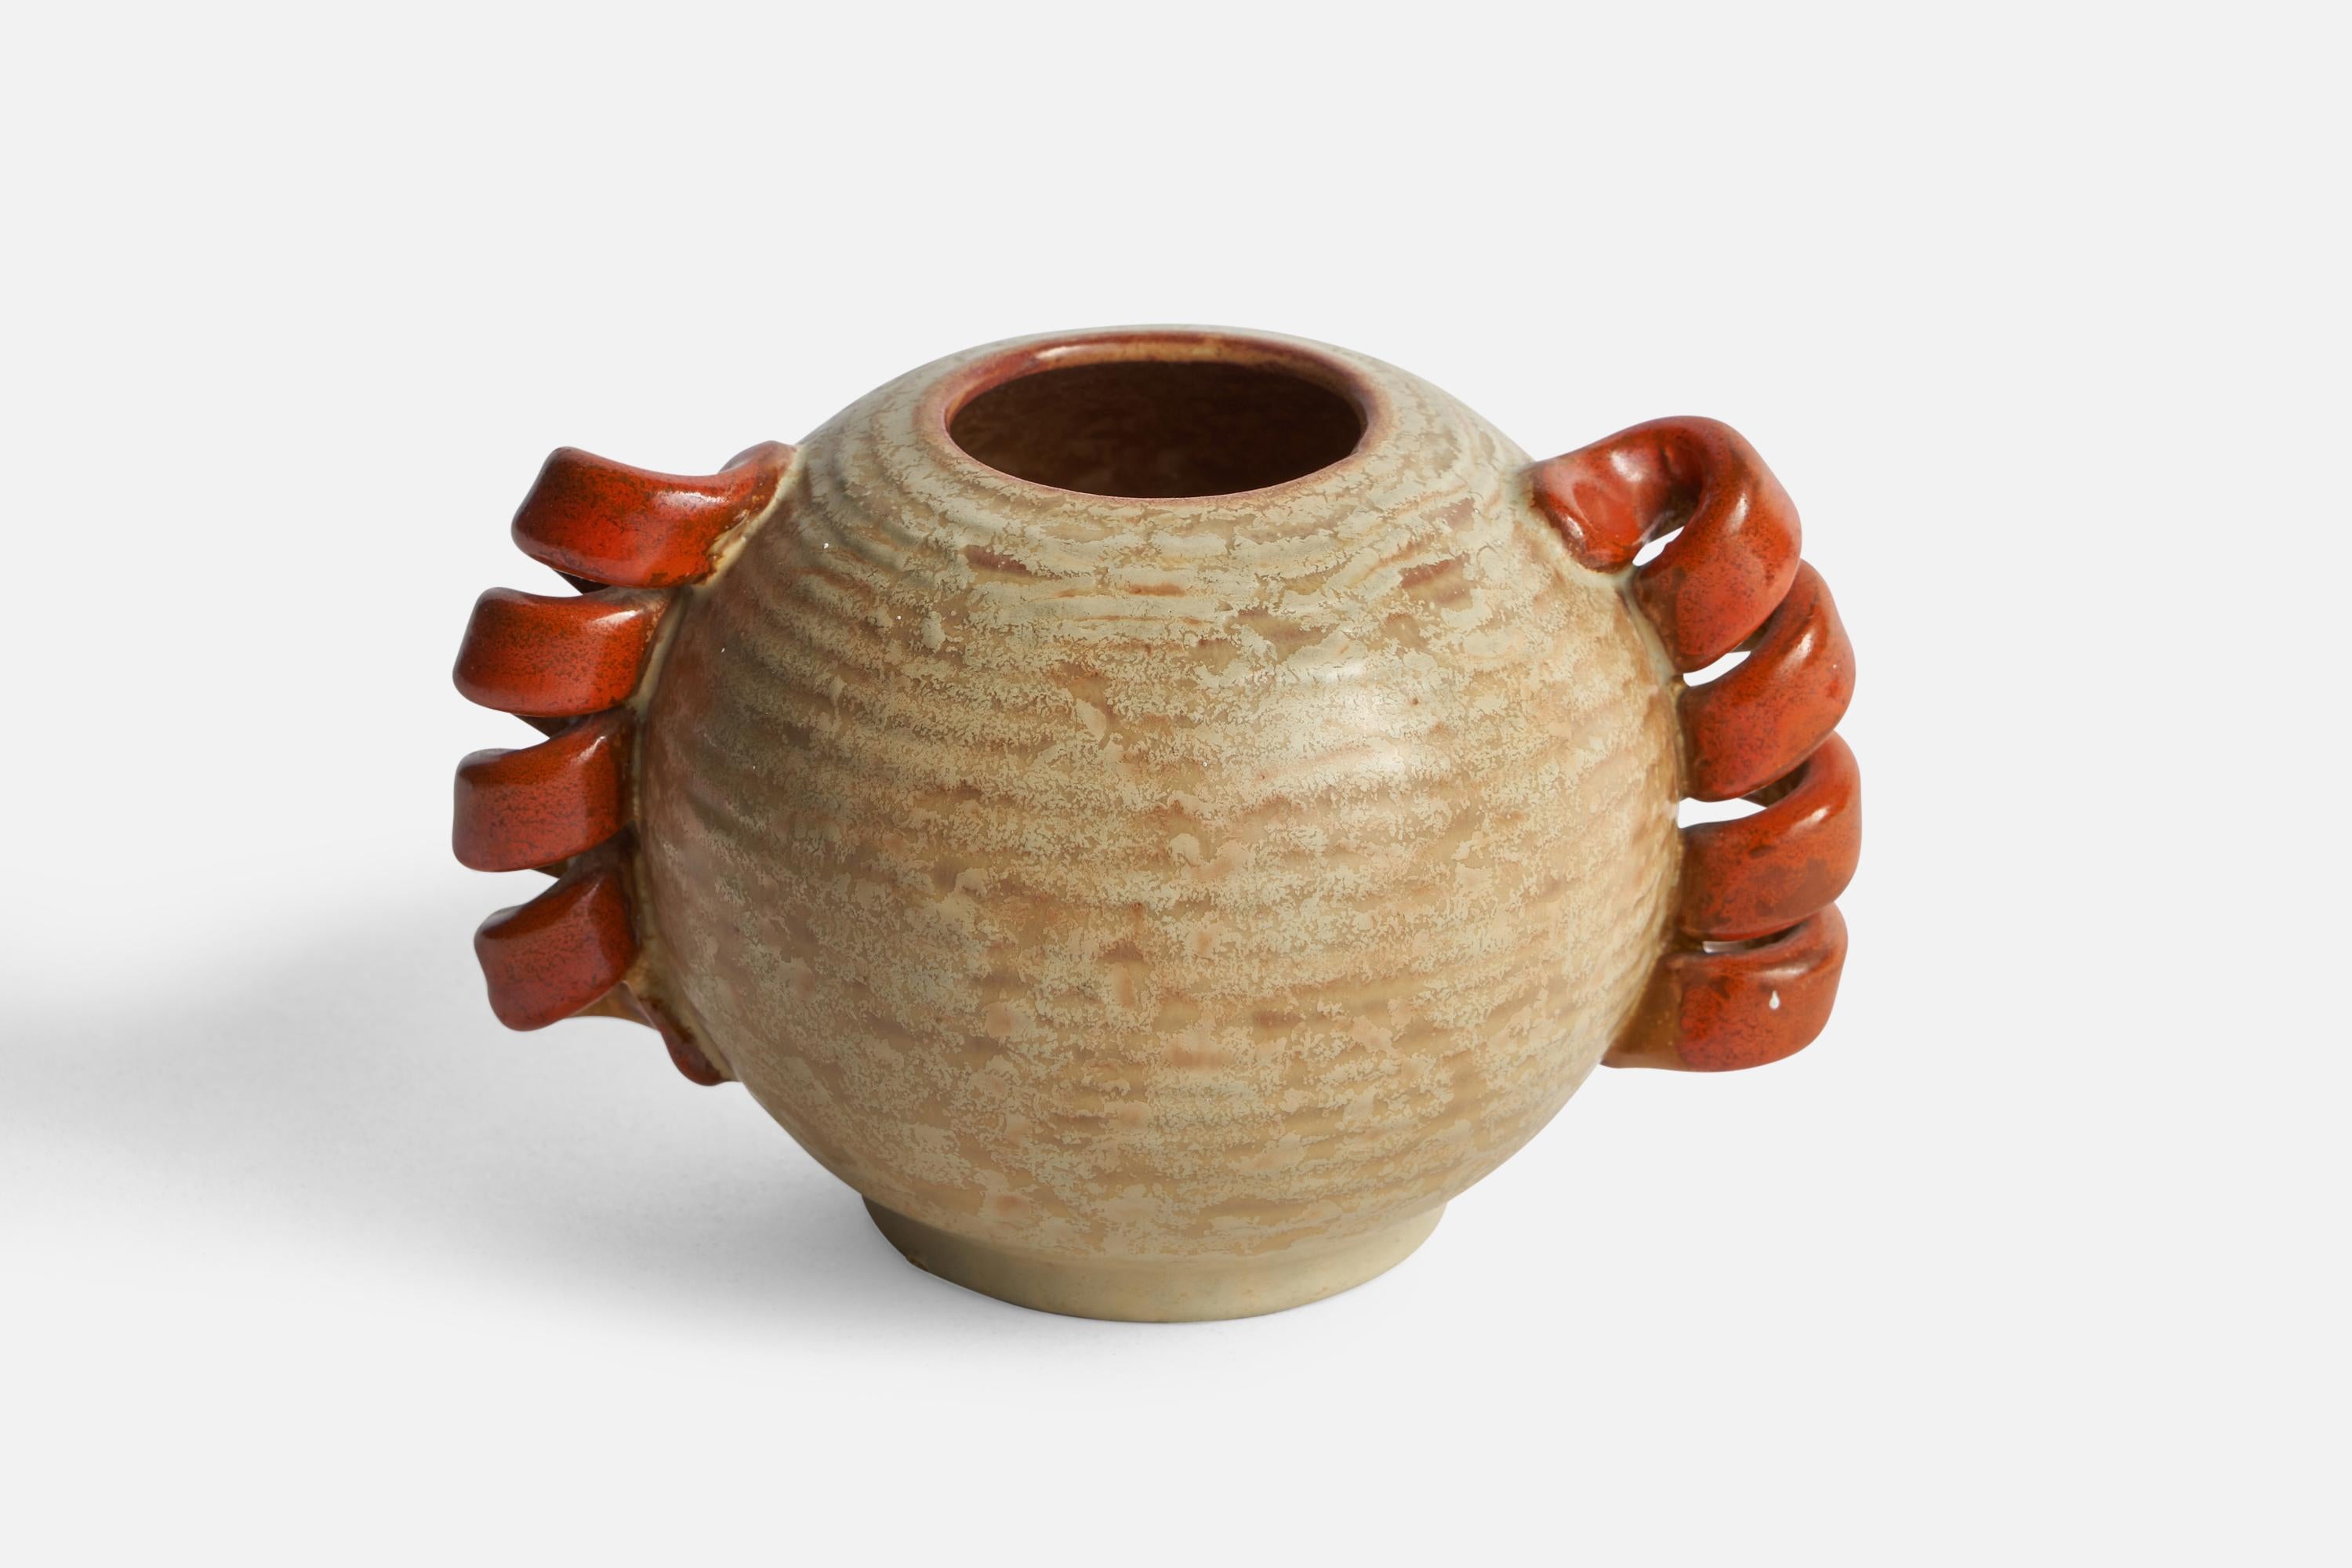 A beige and orange-glazed stoneware vase designed and produced by Andersson & Johansson, Höganäs, Sweden, c. 1940s.